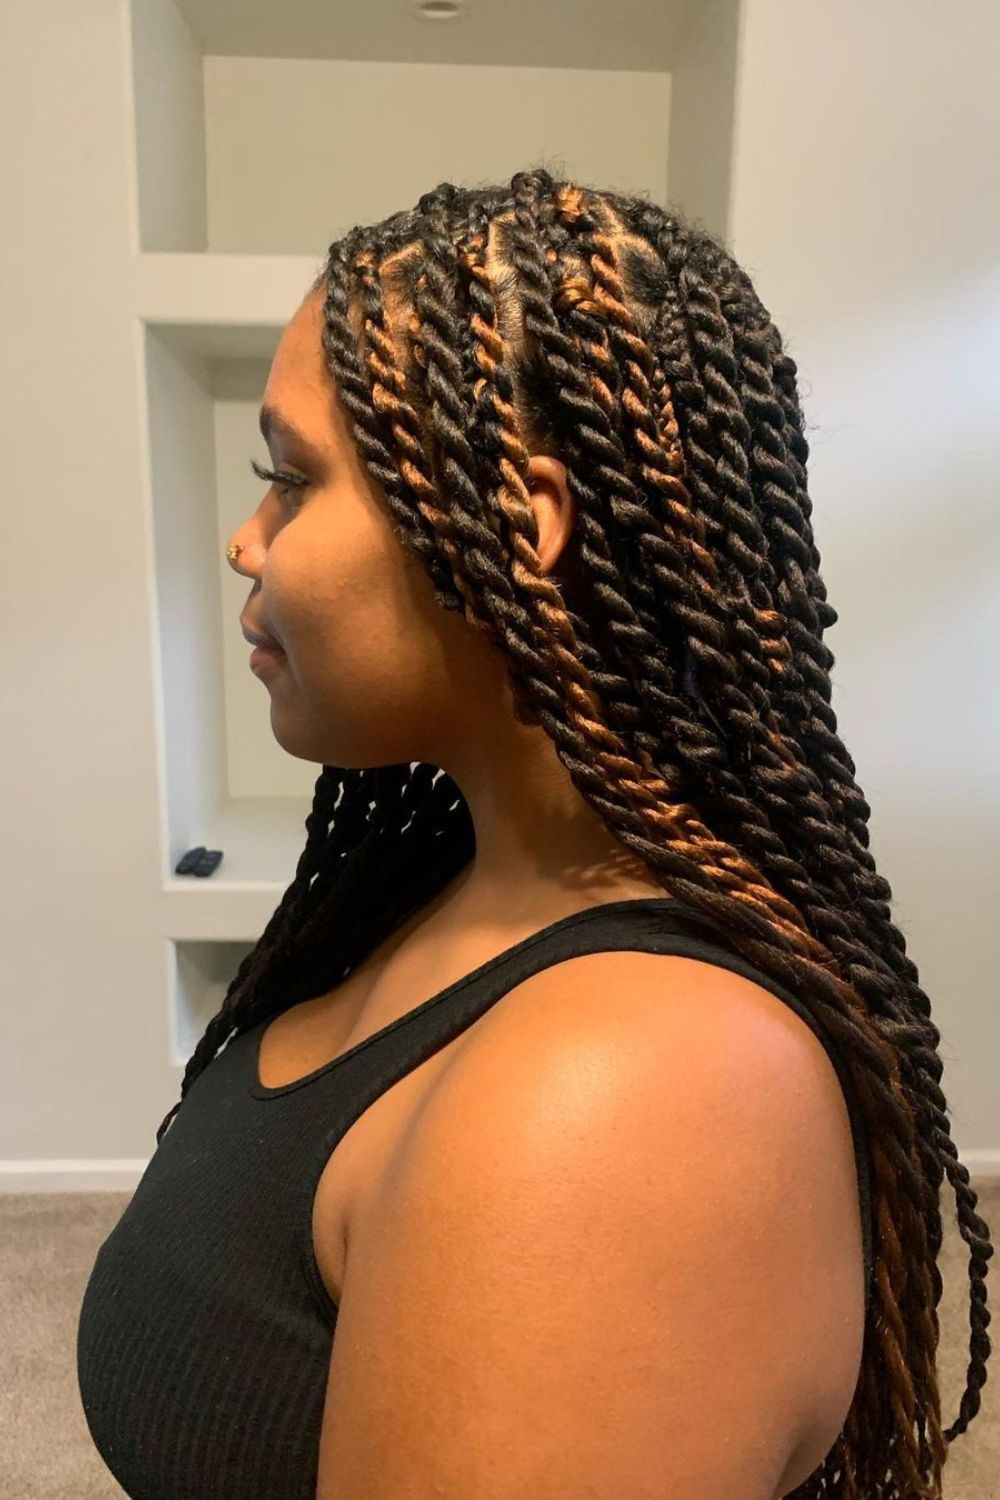 A woman with long Senegalese twists with highlights.